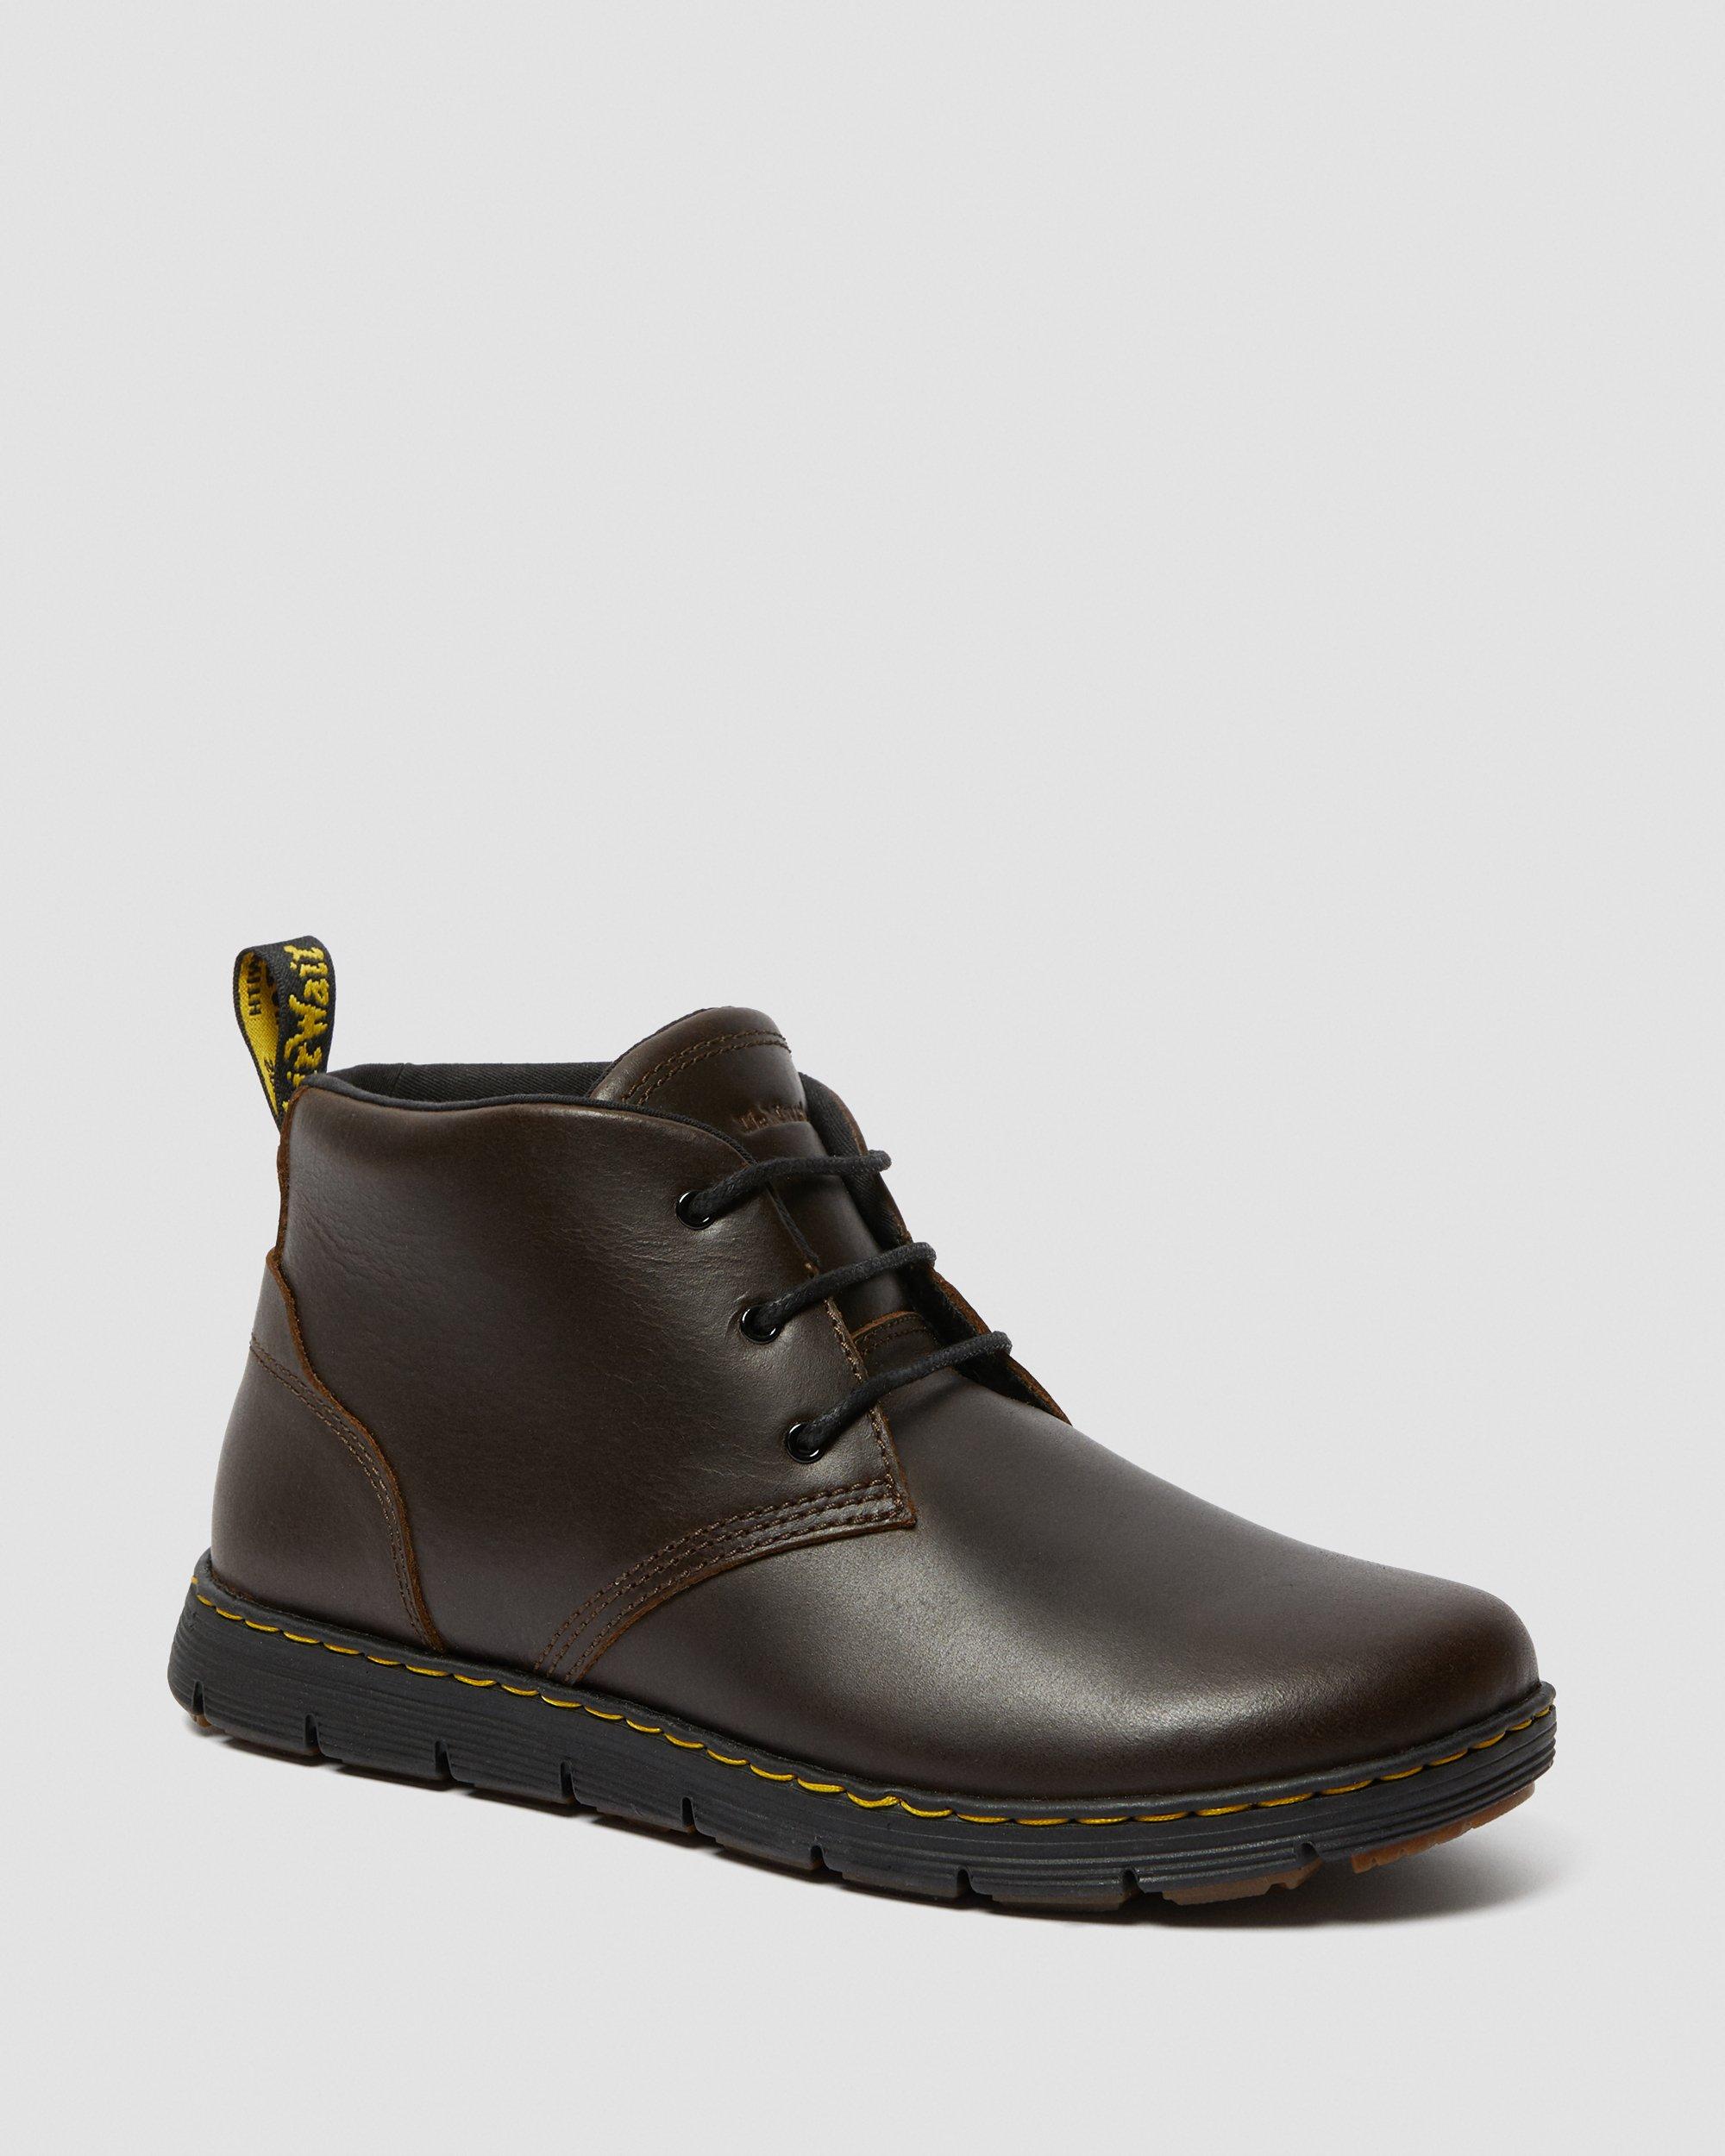 LEATHER CHUKKA BOOTS | Dr. Martens